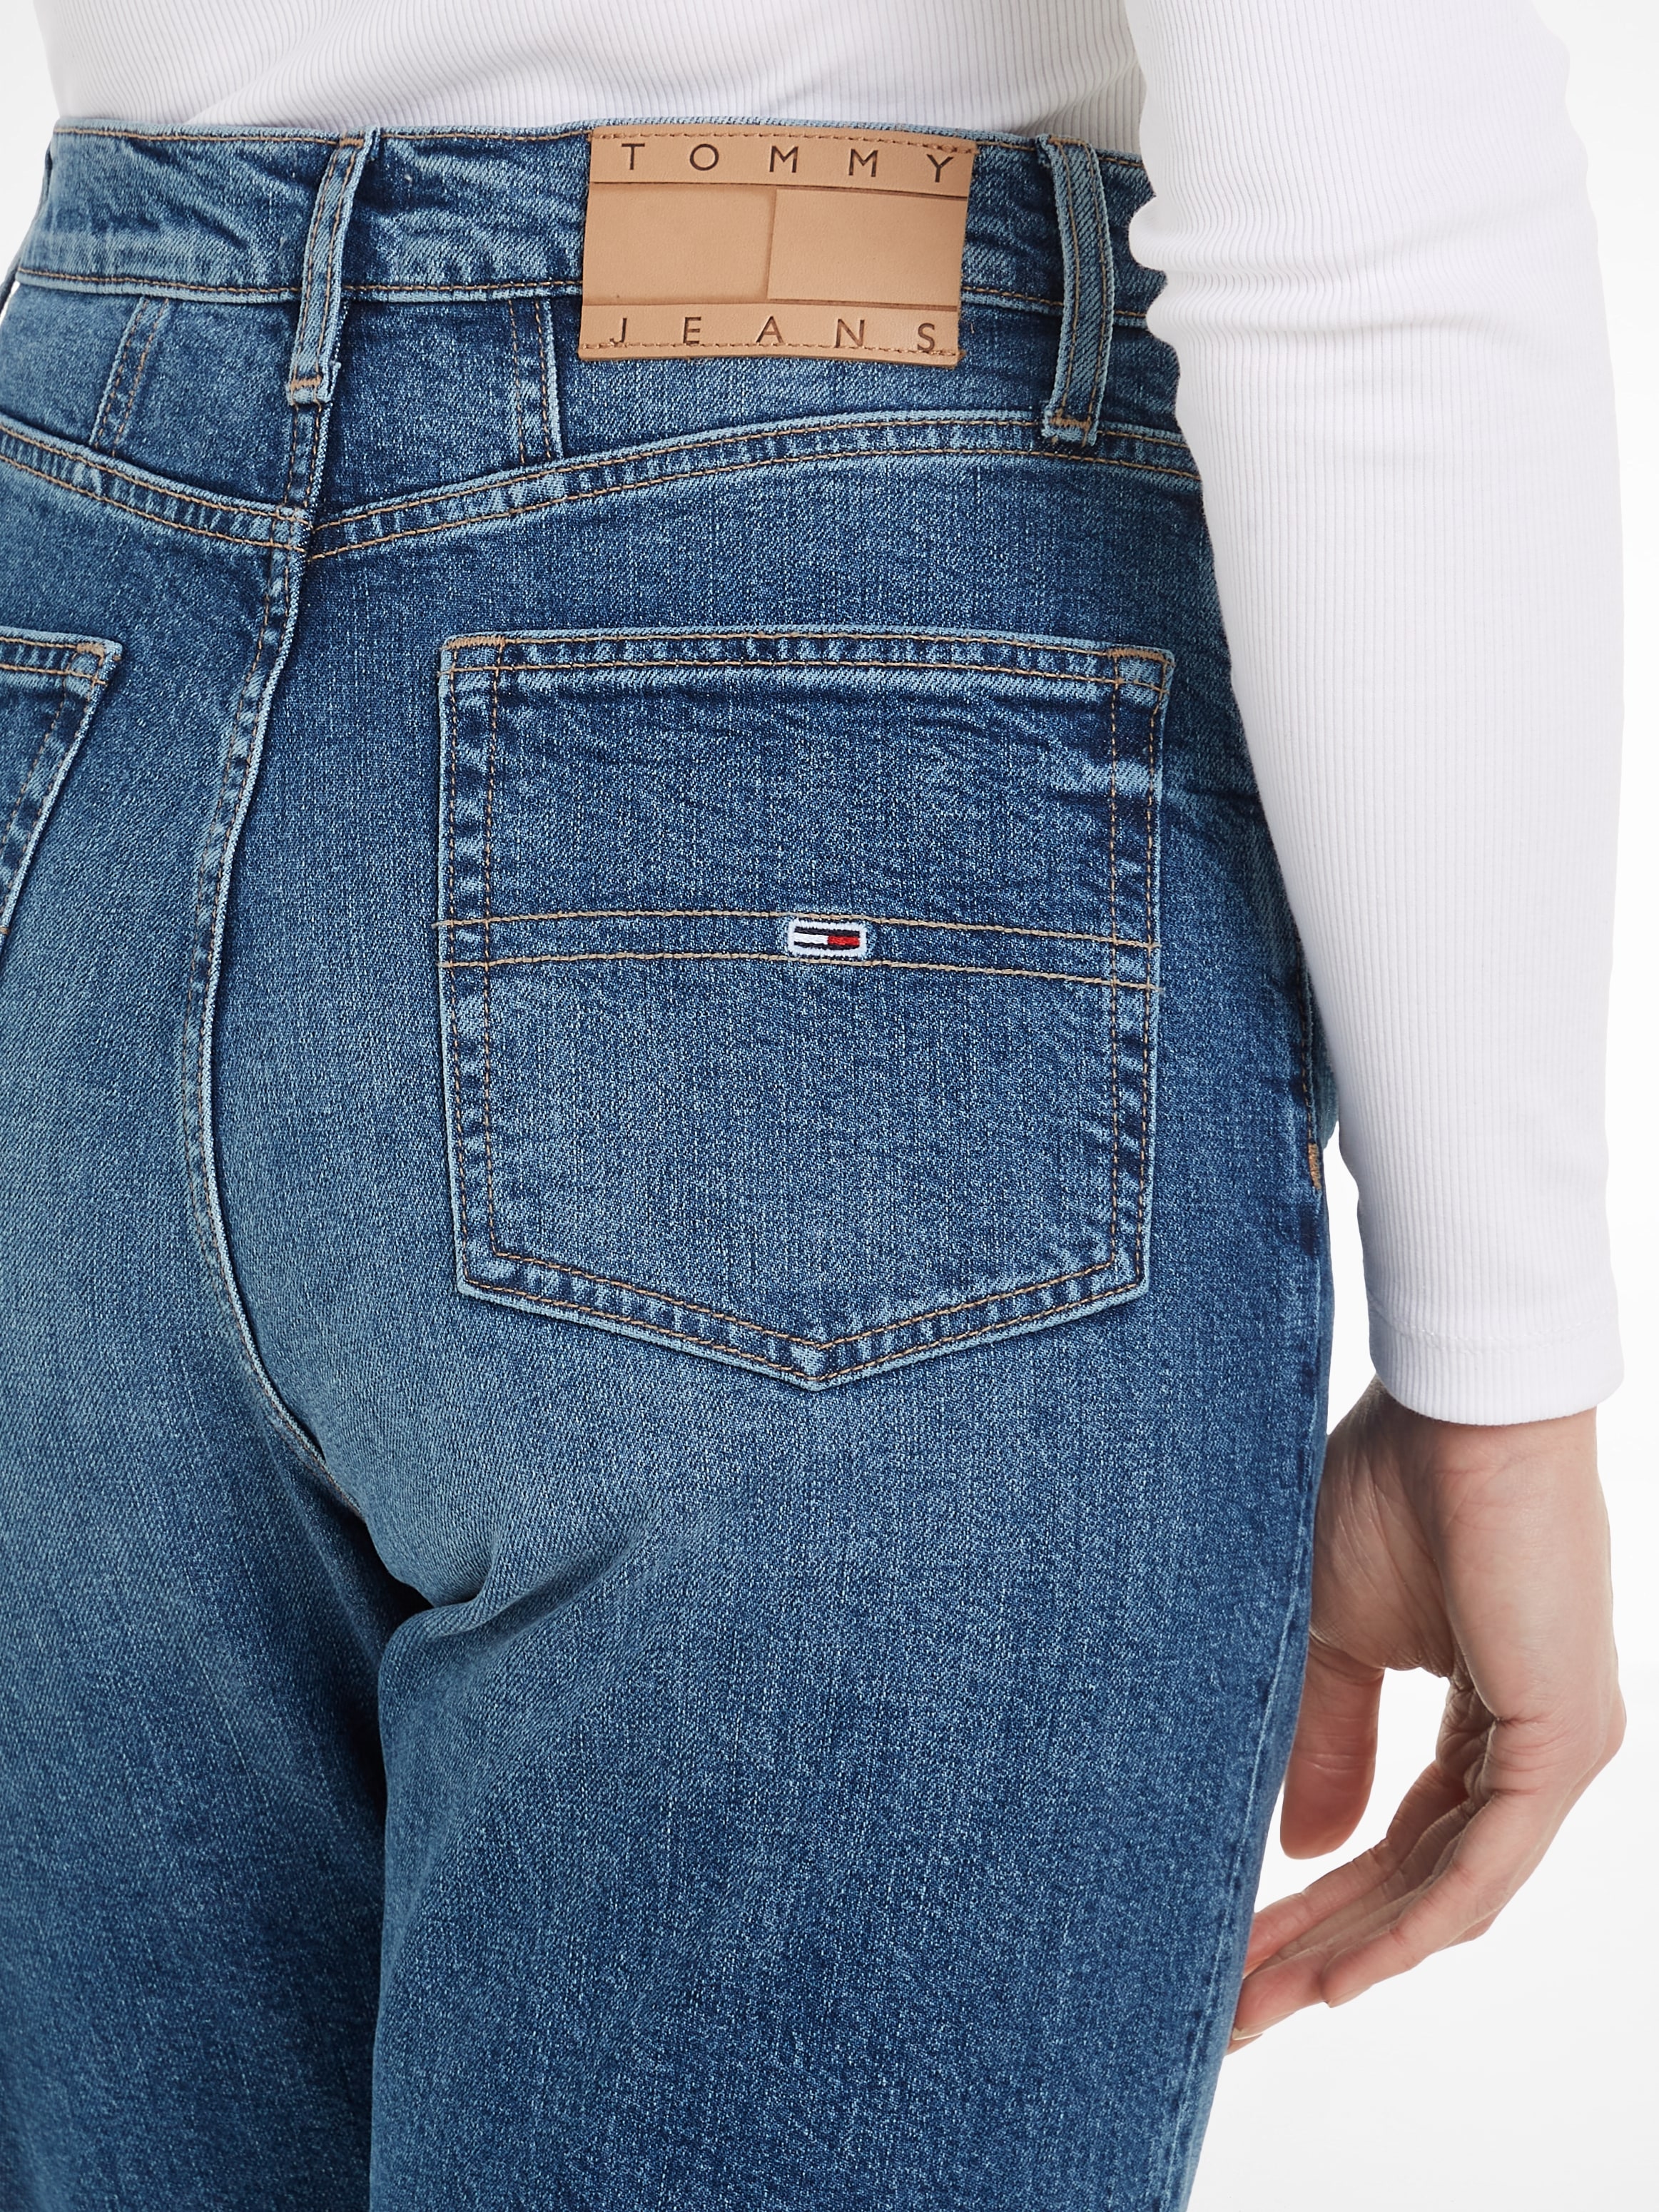 Tommy Jeans Mom-Jeans »MOM DG«, bei ♕ UH mit TPR JEAN Logopatch